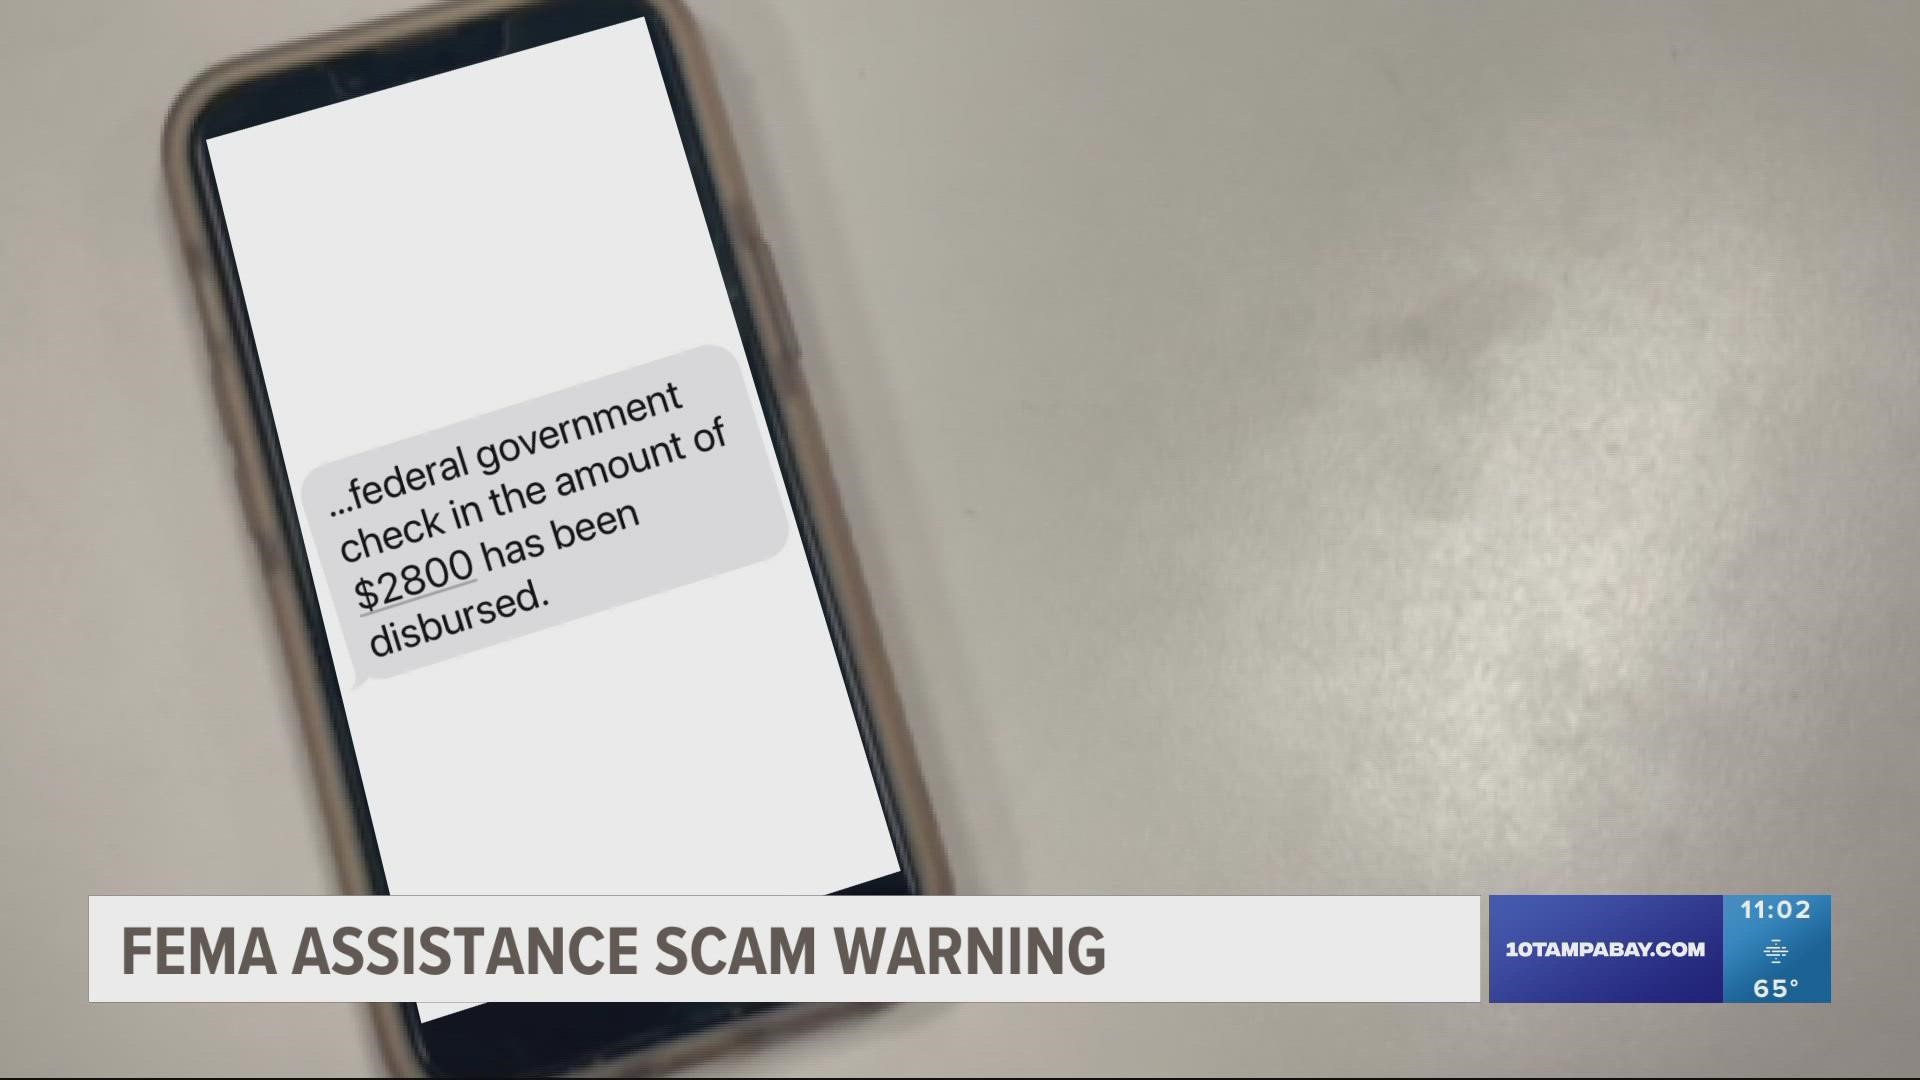 A survivor recently reported getting a text that their “federal government check in the amount of $2,800 has been disbursed,” according to FEMA.